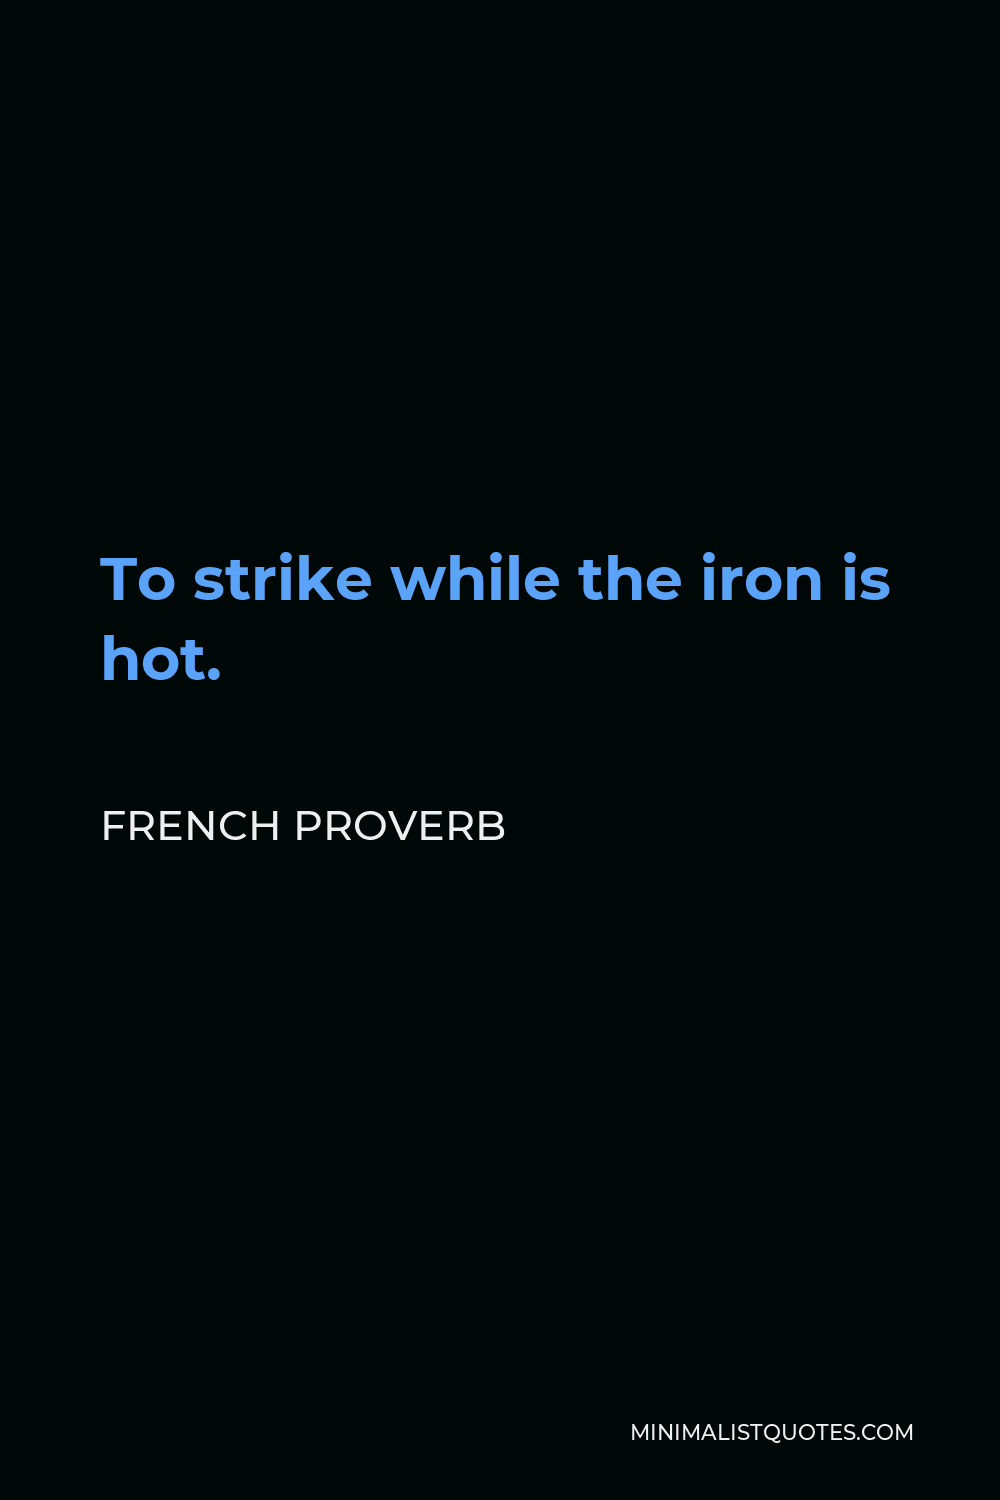 French Proverb Quote - to strike while the iron is hot.